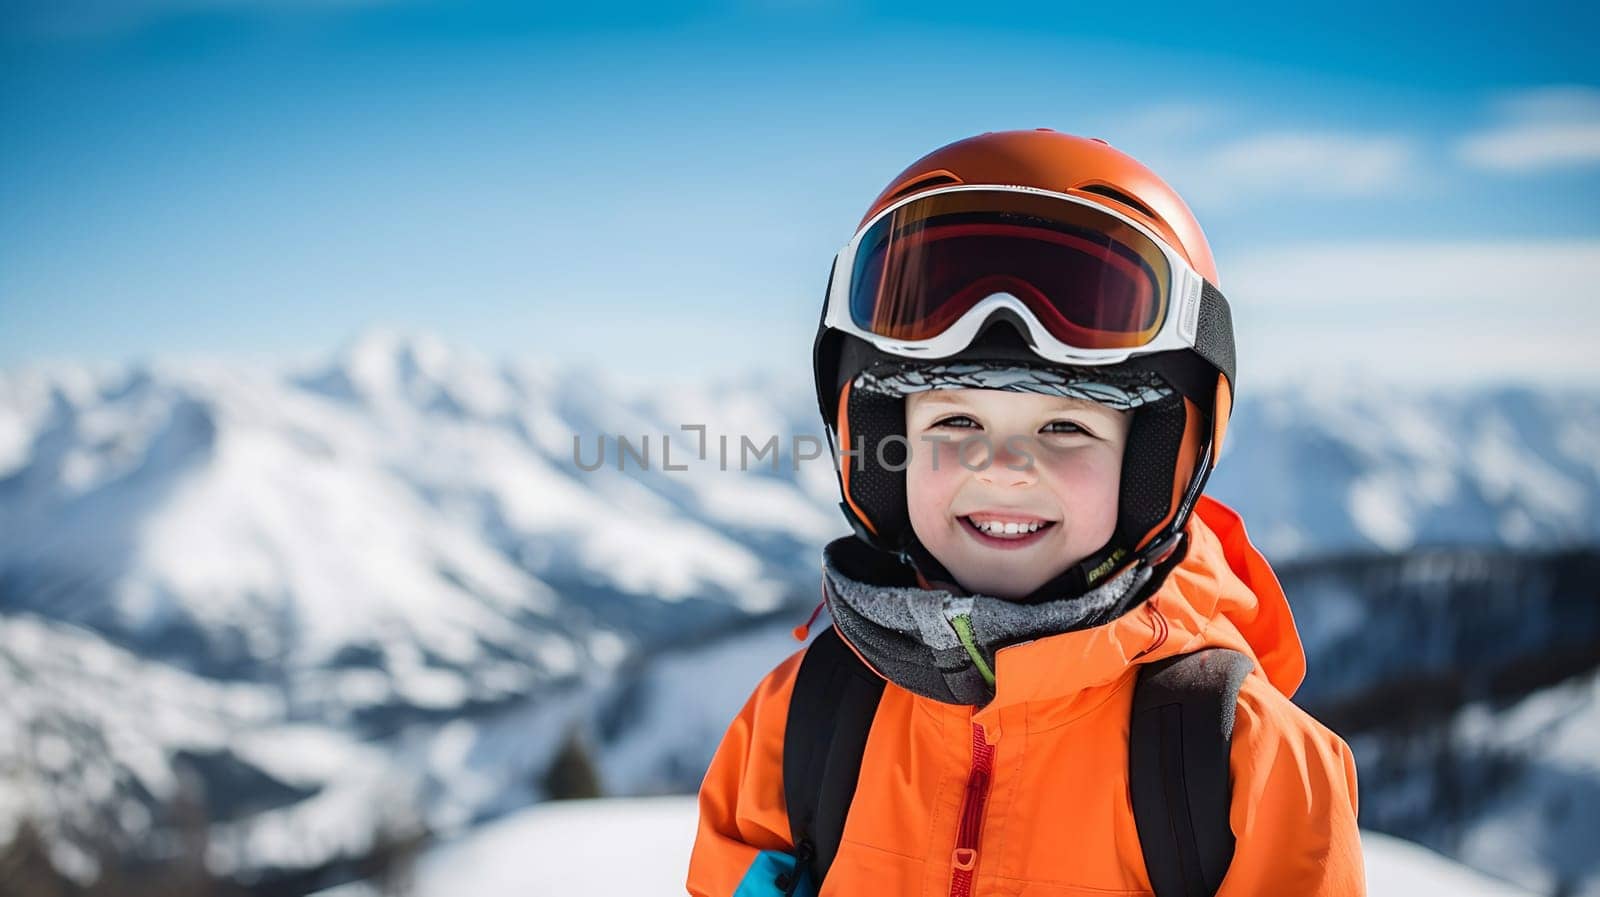 happy, smiling child snowboarder against the backdrop of snow-capped mountains at a ski resort, during the winter holidays. Concept of traveling around the world, recreation, winter sports, vacations, tourism in the mountains and unusual places.